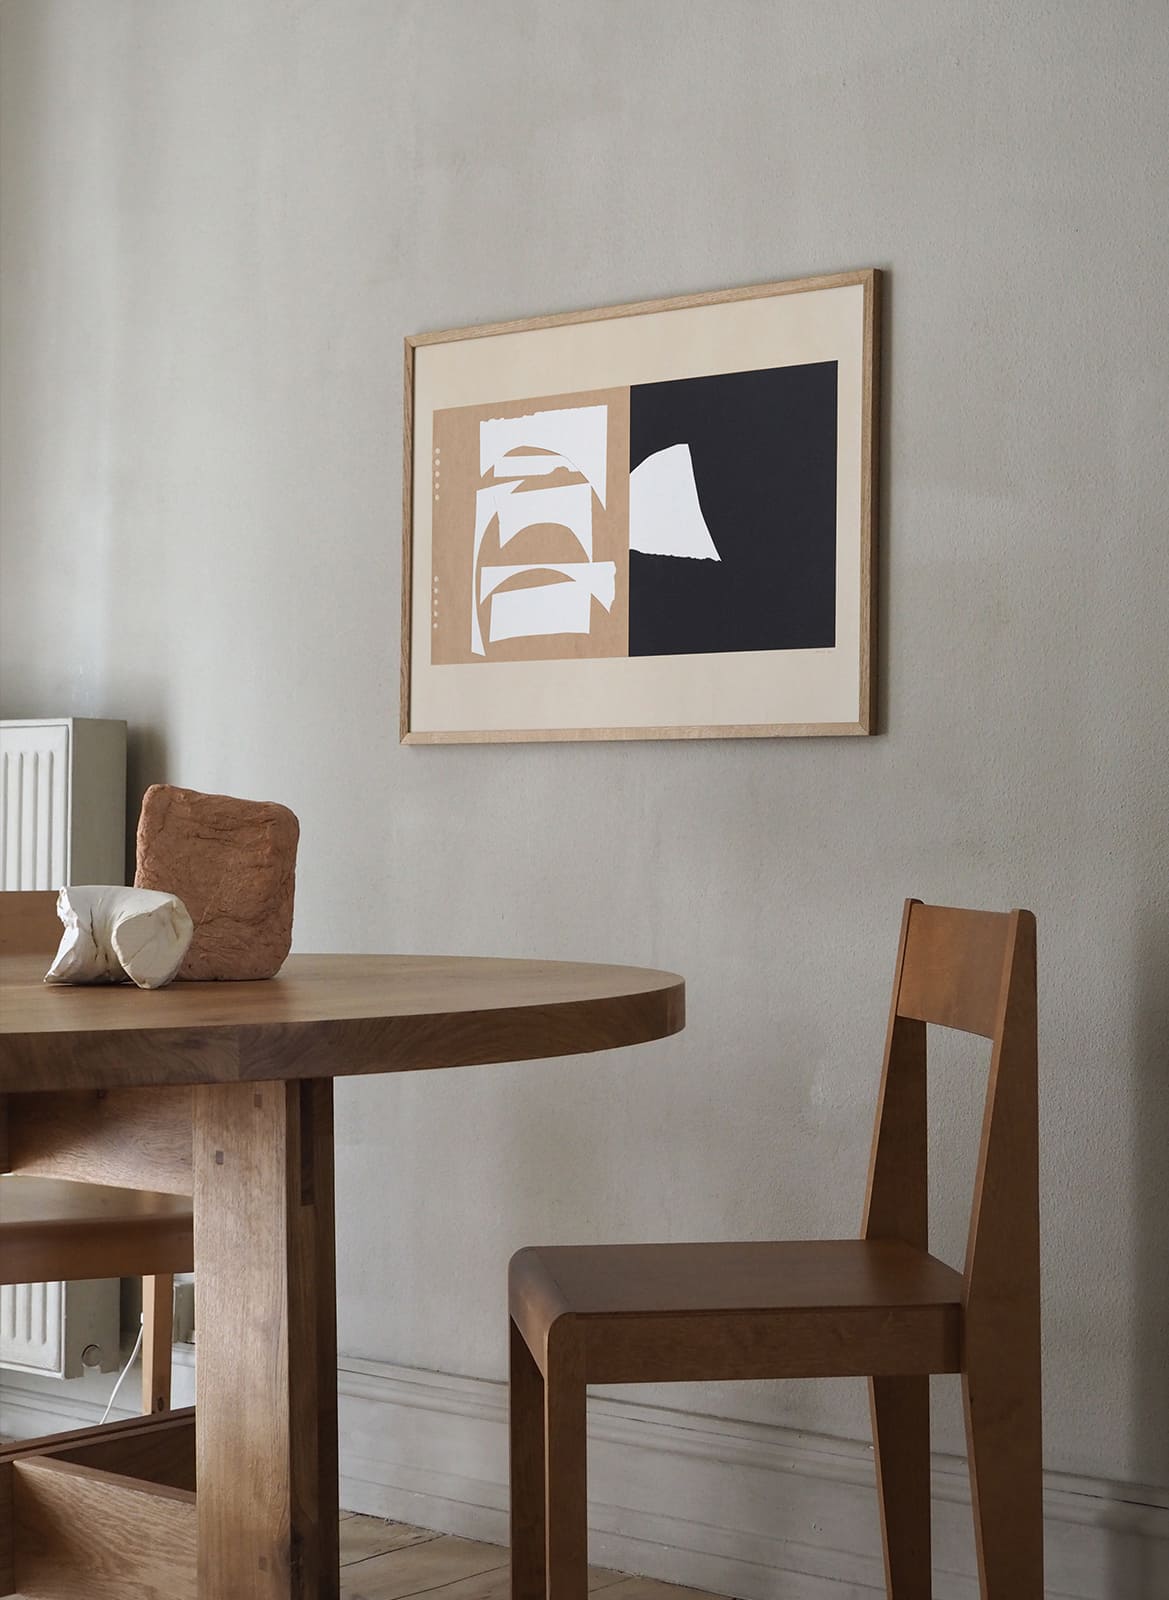 Framed minimalistic poster hanging above dining table by Atelier Cph